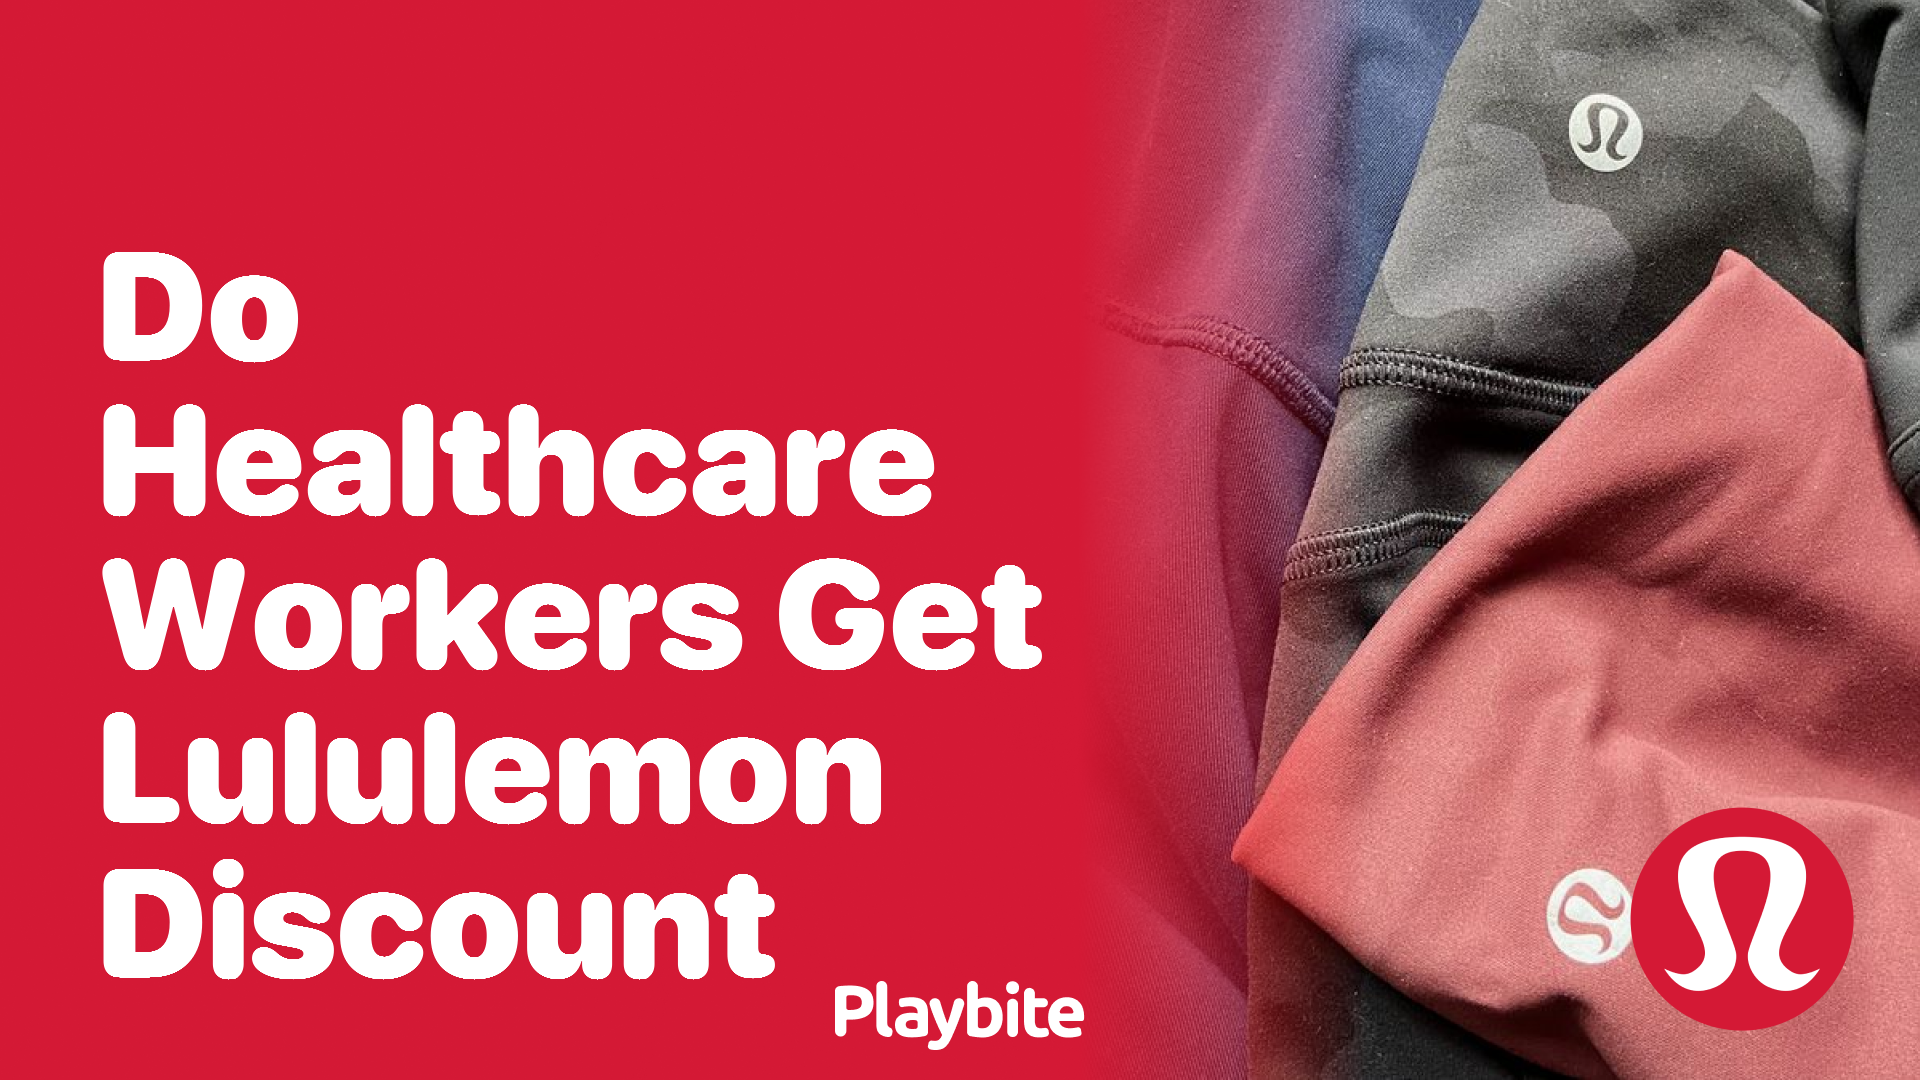 lululemon discount for healthcare workers